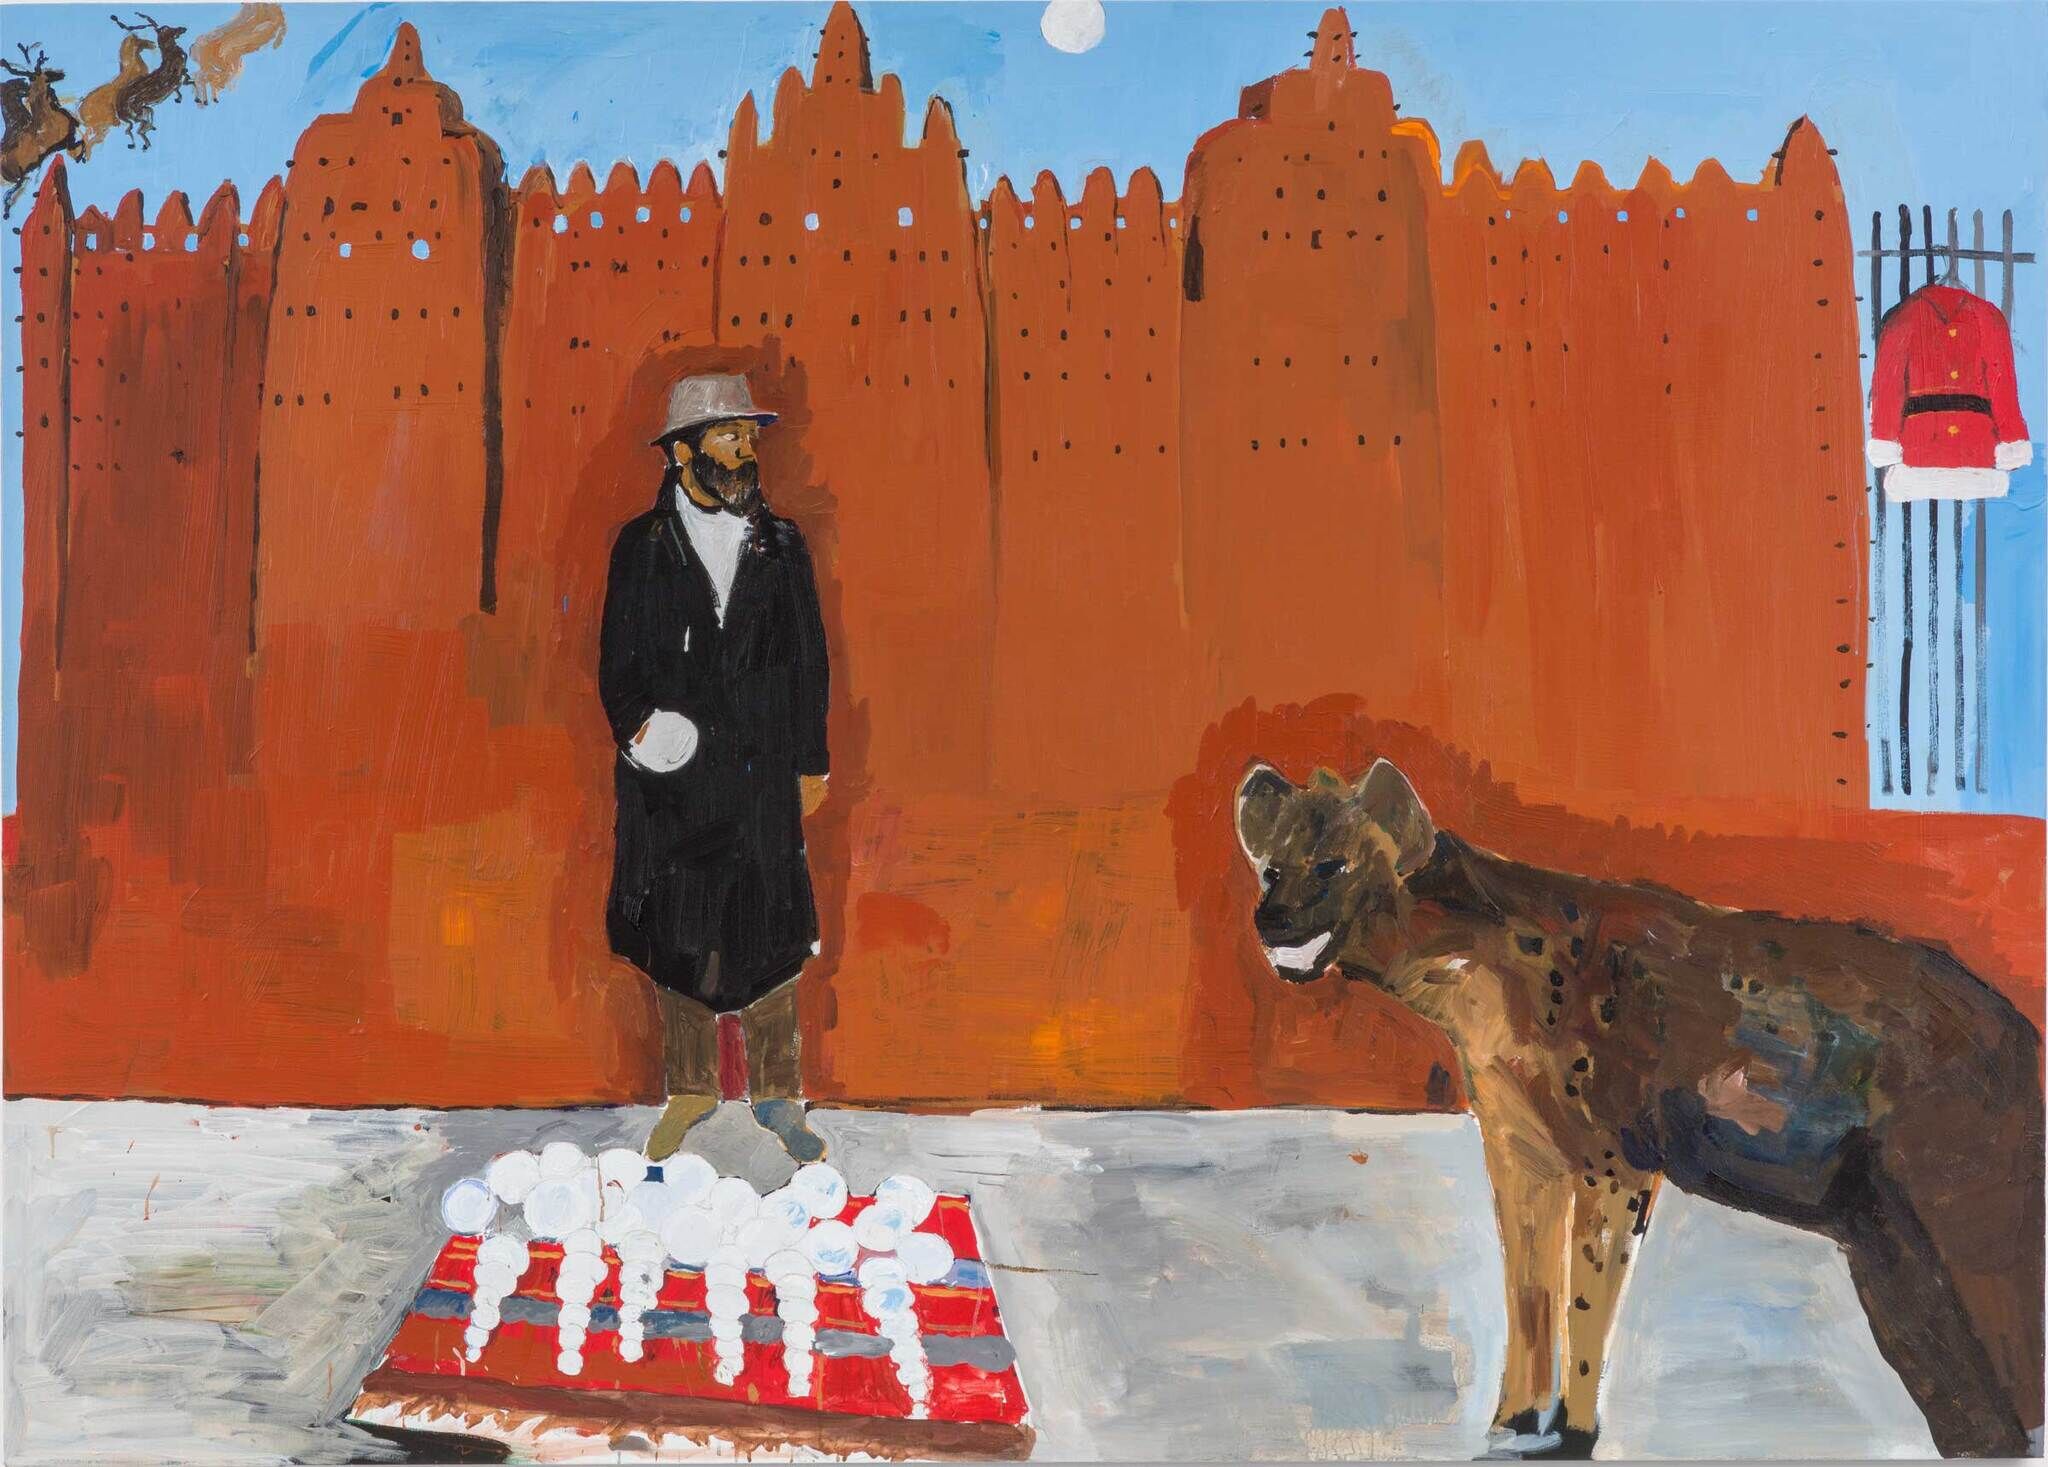 A Black man in a grey fedora and black jacket stands on the sidewalk, in front of a large reddish-brown building. Outstretched before him is a brightly colored rug with snowballs in an assortment of sizes piled on top. Standing on the sidewalk, to the right of the painting, is a hyena. Strips of blue sky are visible around the building, and in the upper-left corner of the painting is a fleet of reindeer flying towards a full moon, which is located at the top center of the painting. To the right of the painting is a black gate with a red Santa Claus jacket hanging on it.